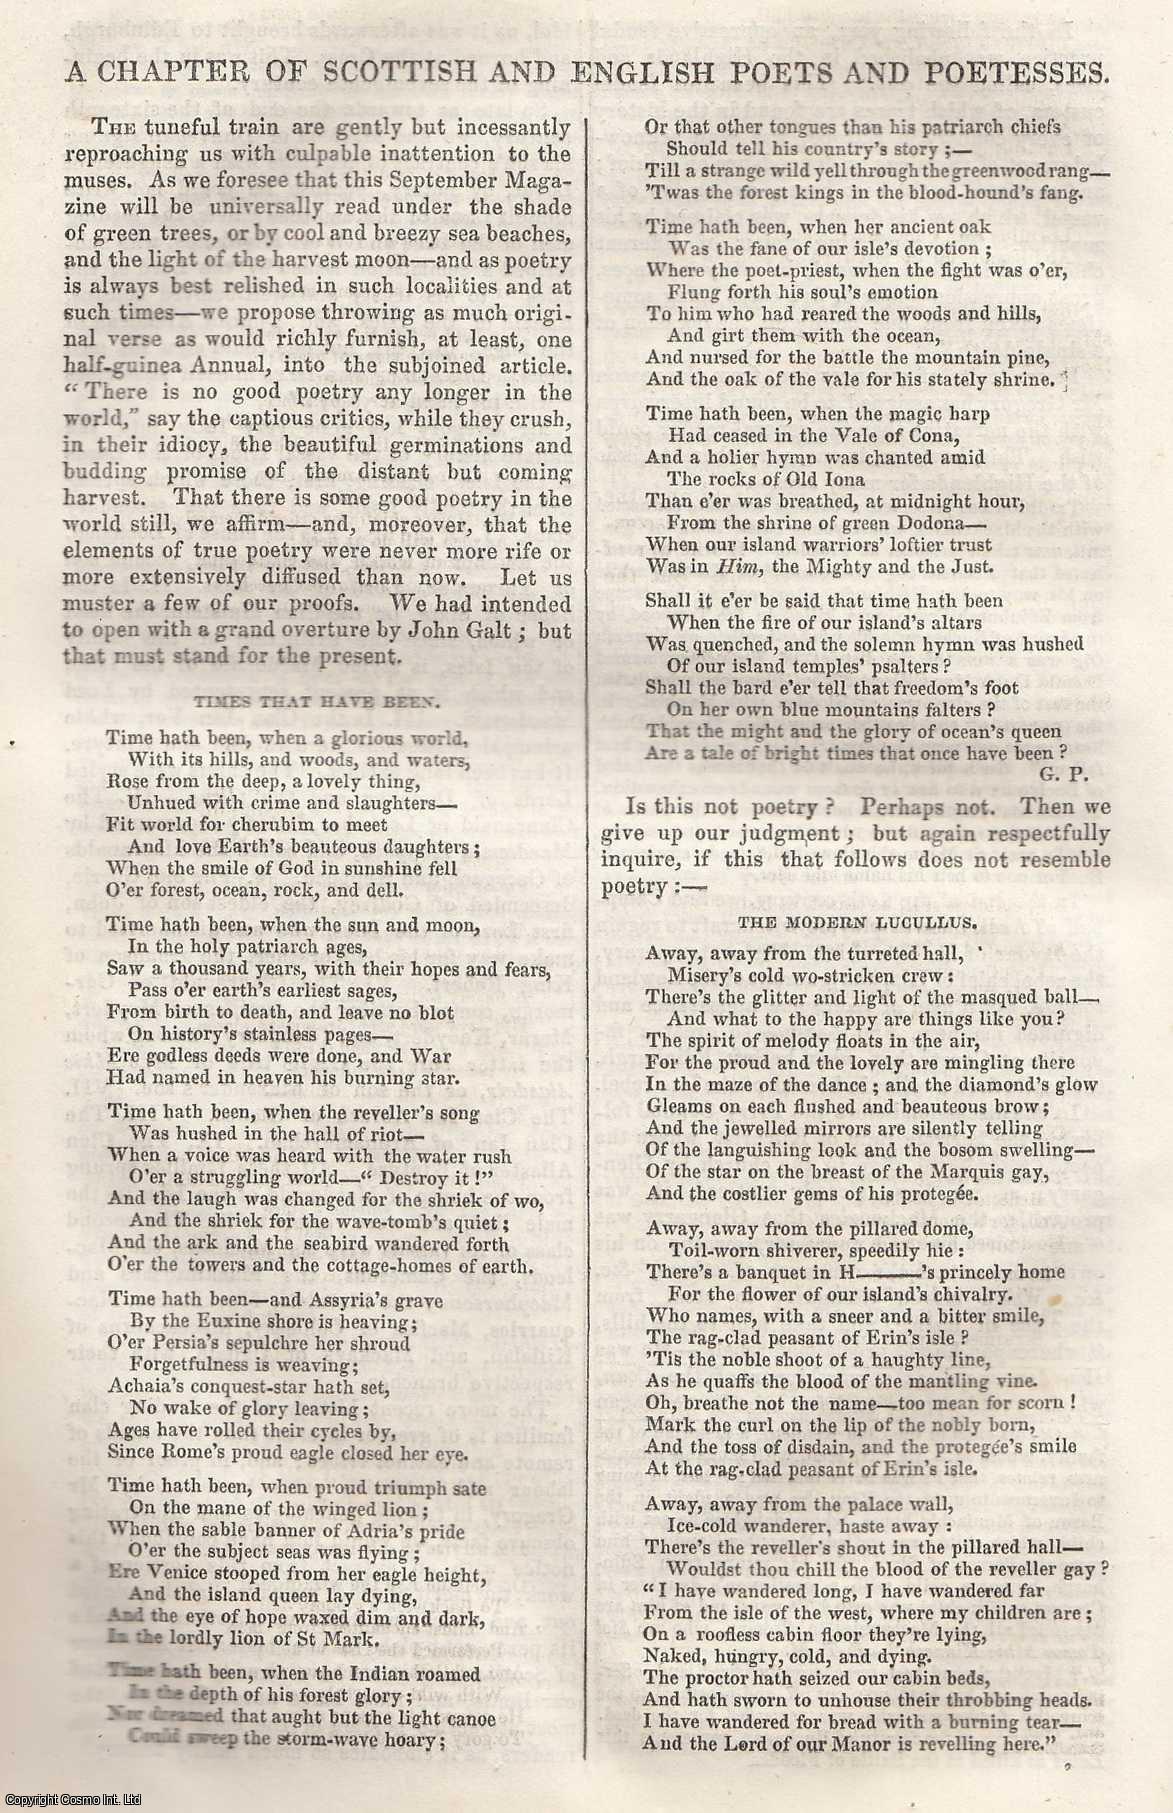 Johnstone, Christian - A Chapter of Scottish and English Poets and Poetesses. An original article from Tait's Edinburgh Magazine, 1836.